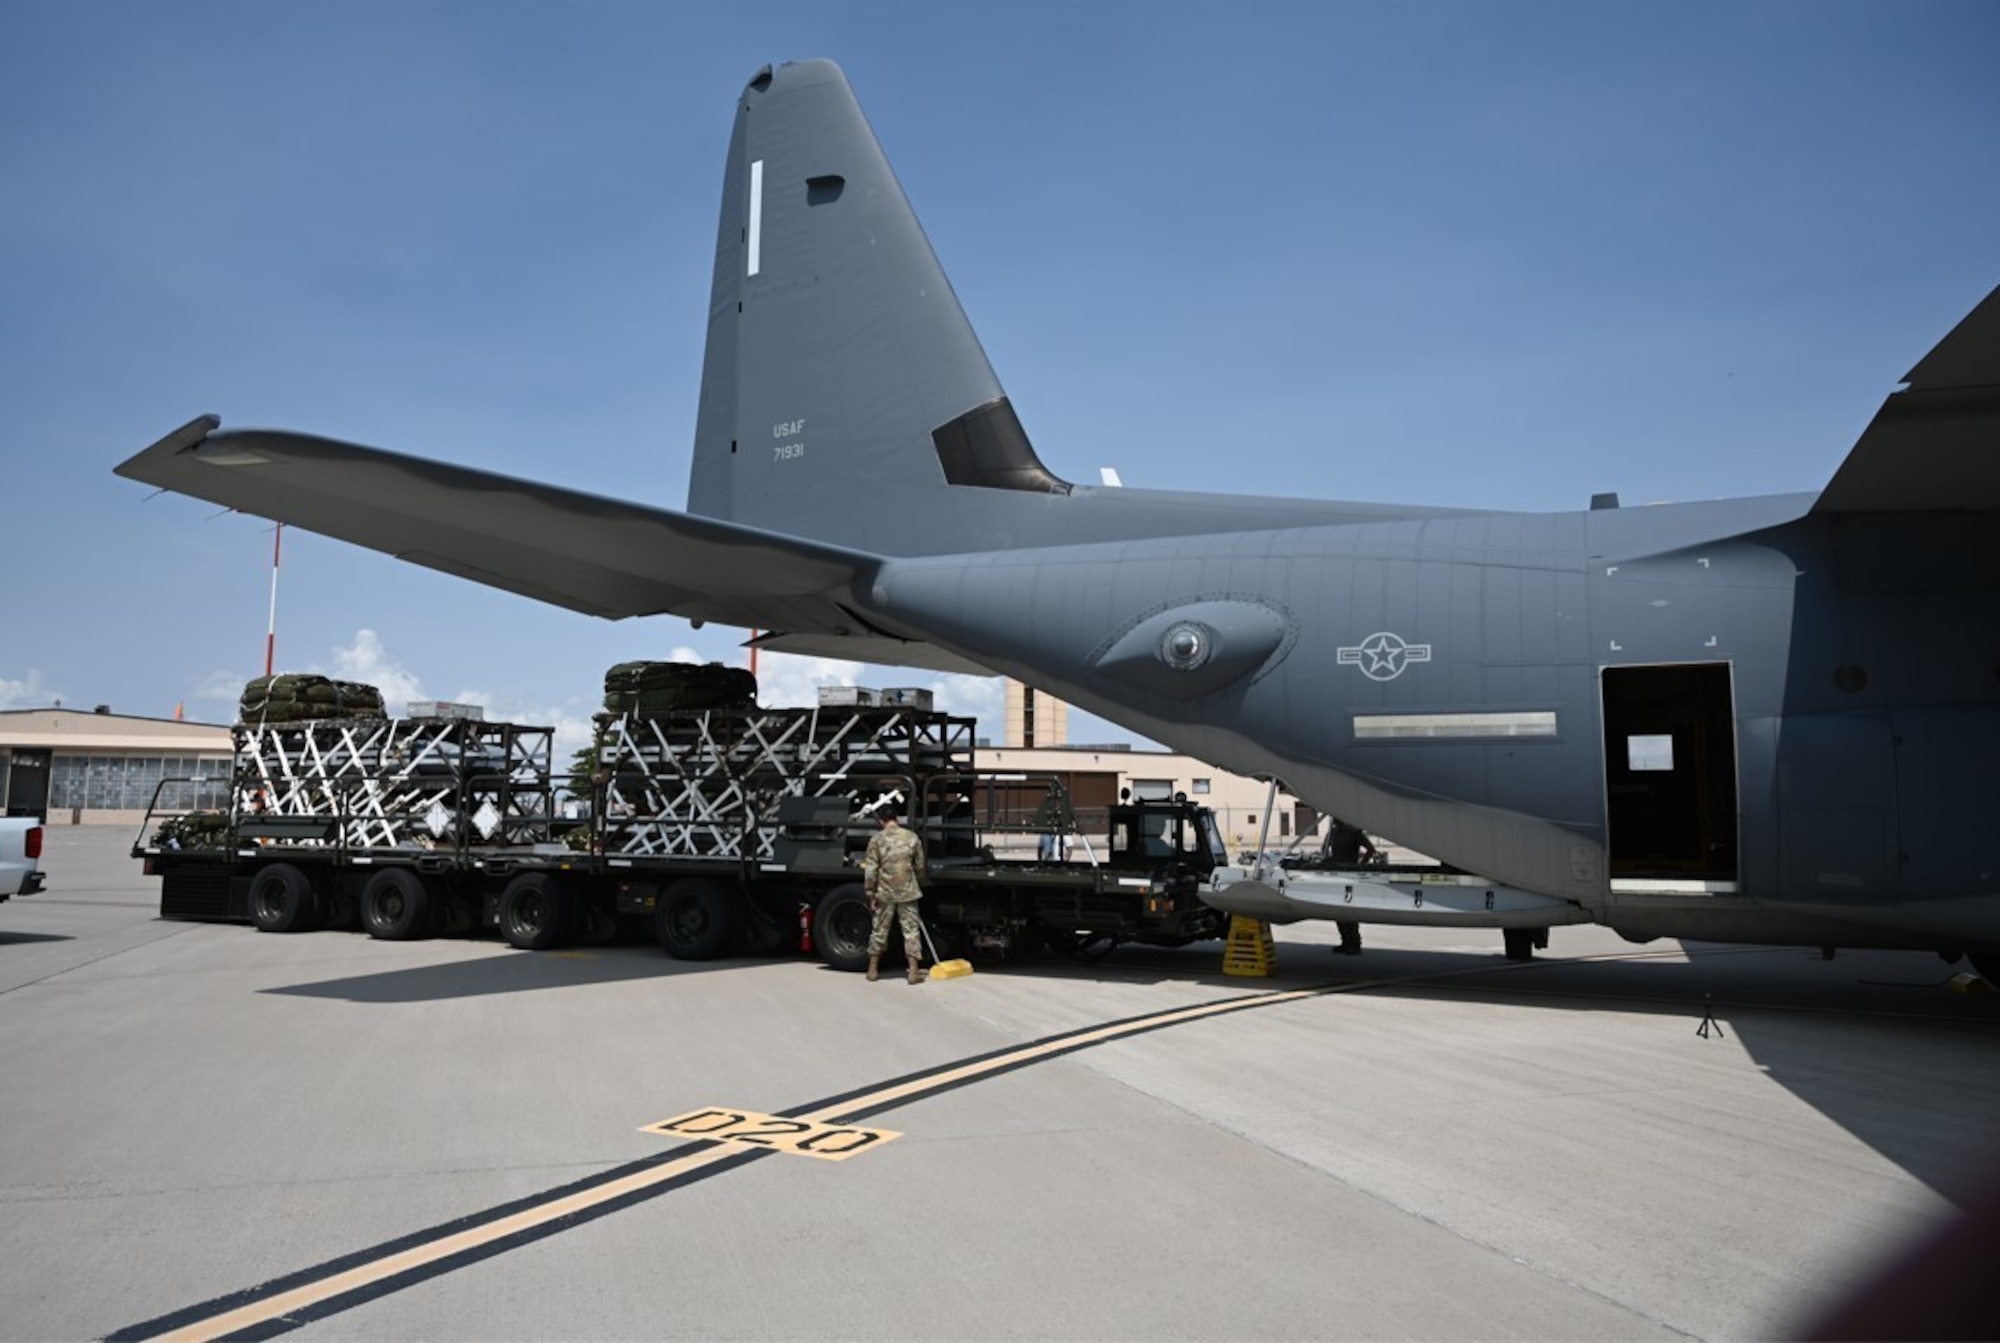 U.S. Air Force personnel load a Rapid Dragon deployment system onto an MC-130J aircraft ahead of an airdrop. Rapid Dragon is compatible with standard airlift inventory systems and provides a roll-on, roll-off capability with no aircraft modifications. (Courtesy photo)